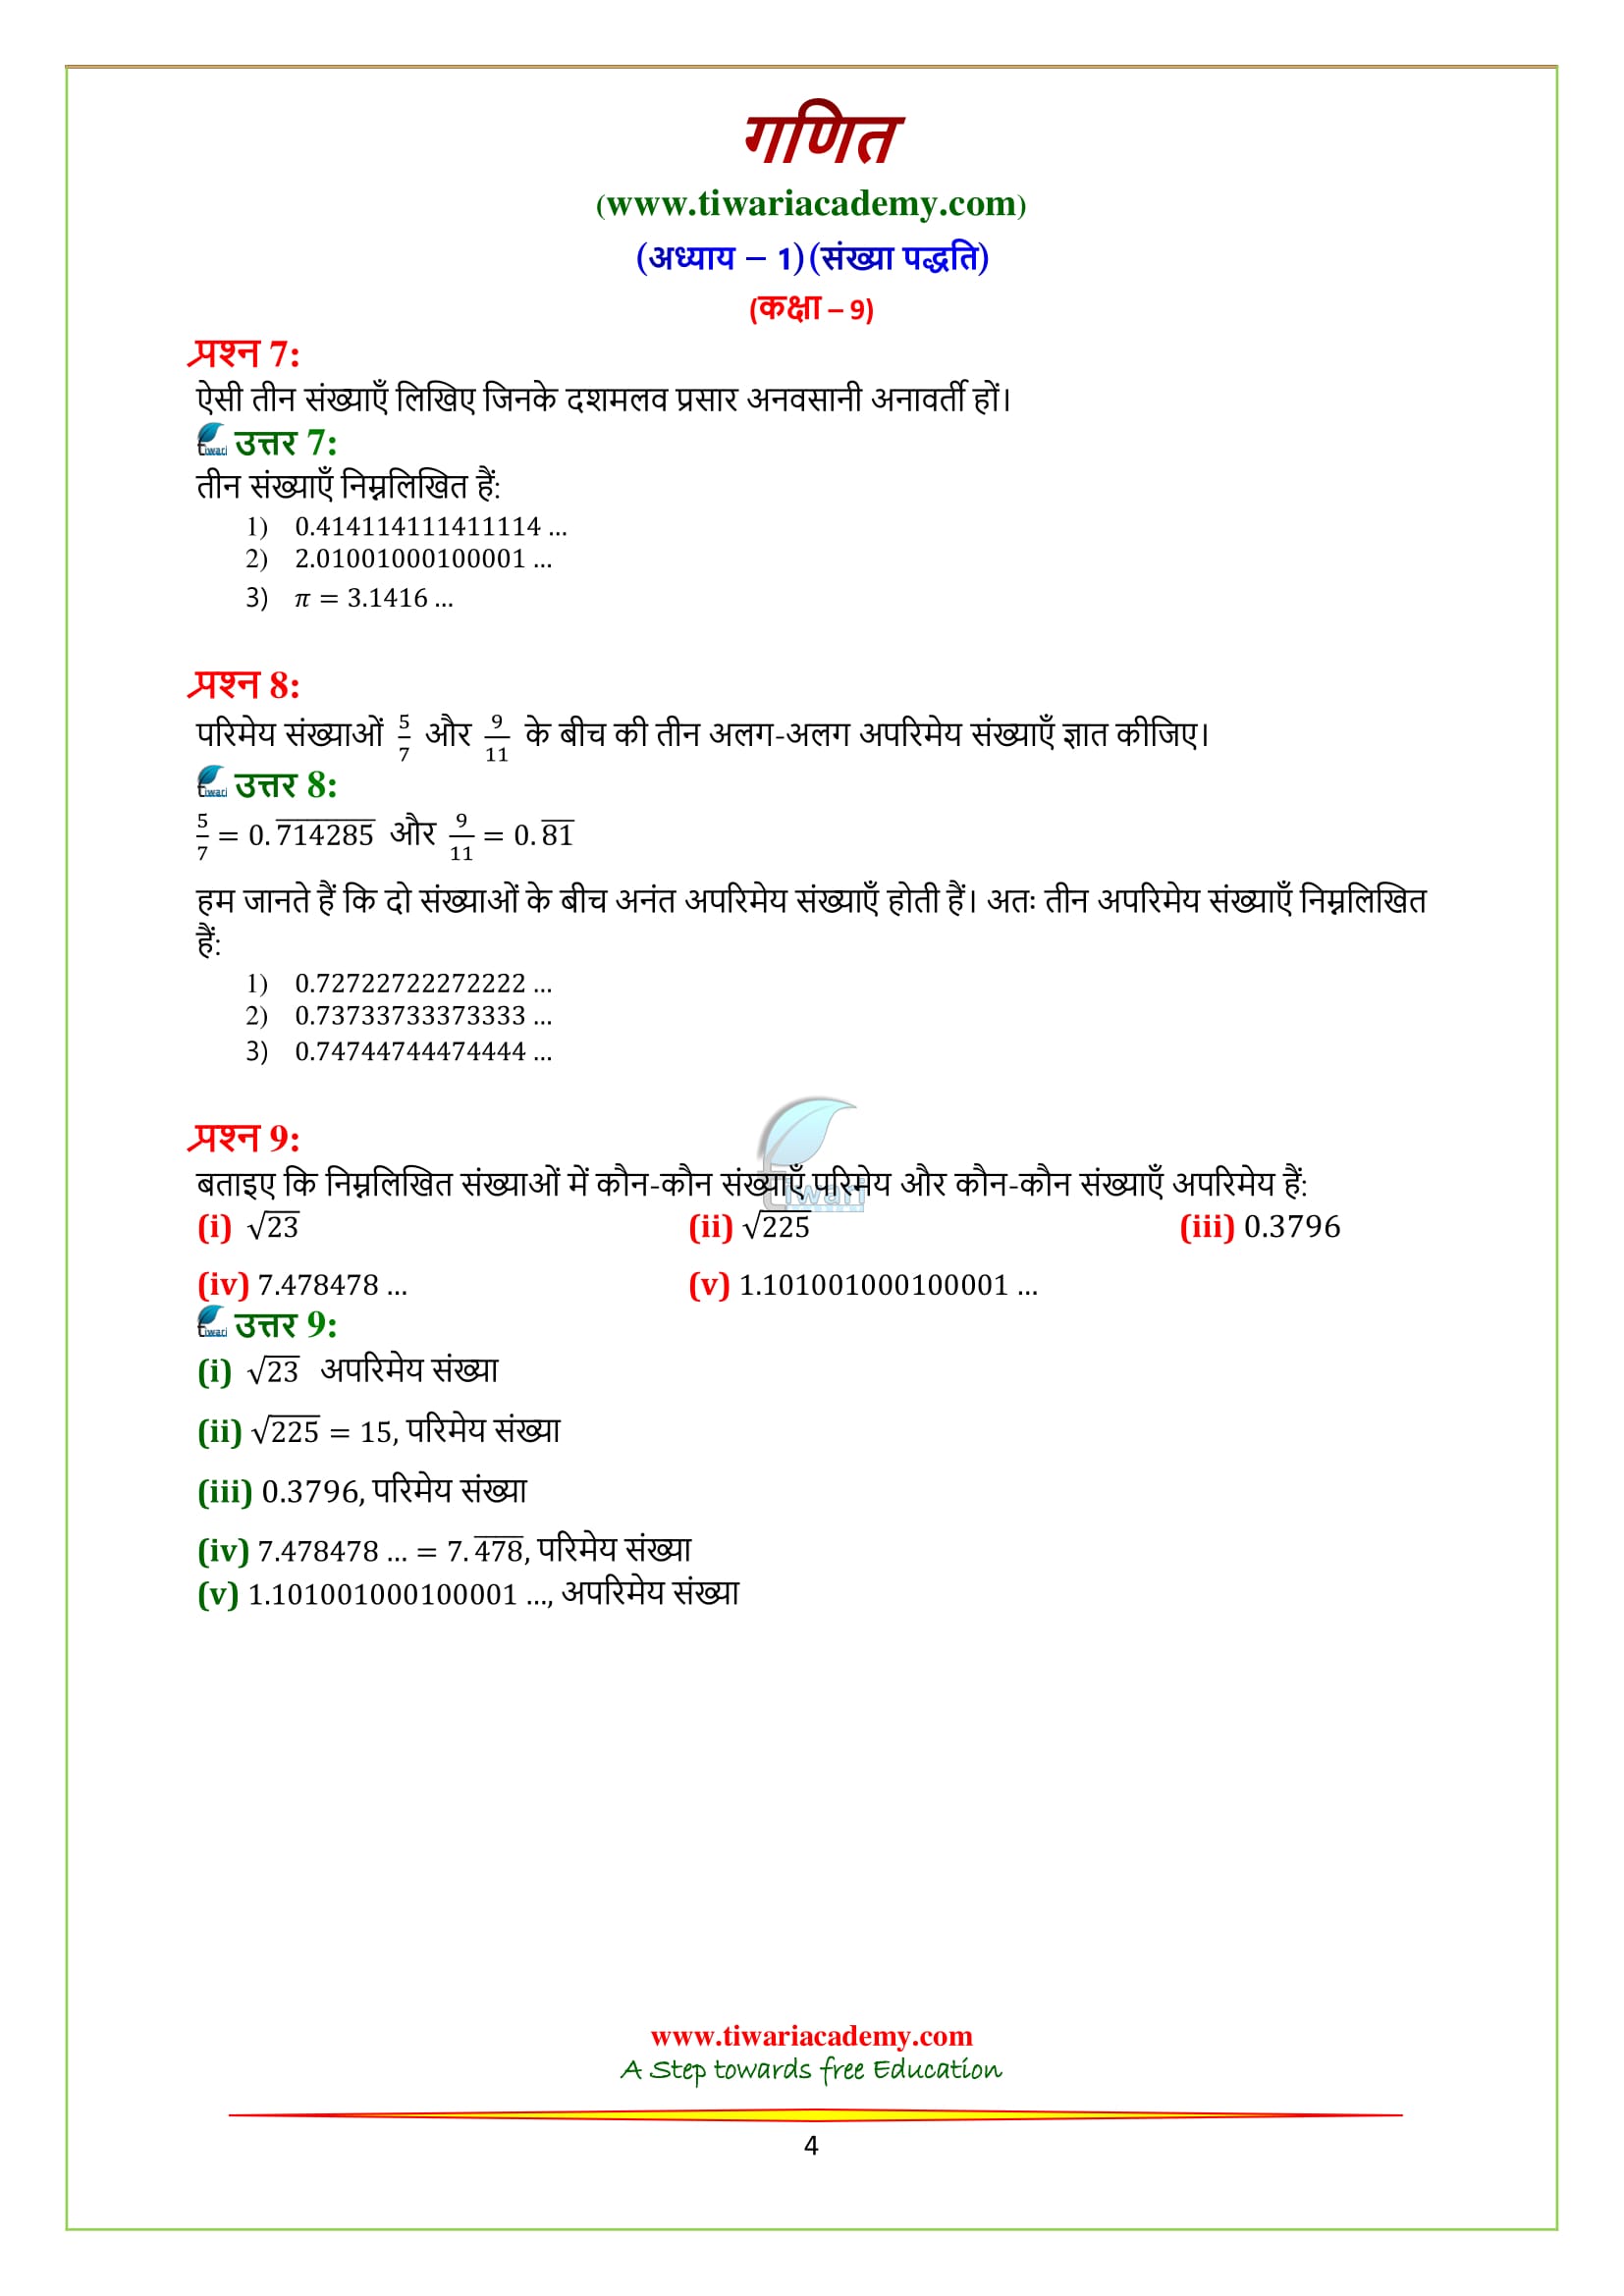 NCERT Solutions for Class 9 Chapter 1 Exercise 1.3 Download in Hindi free